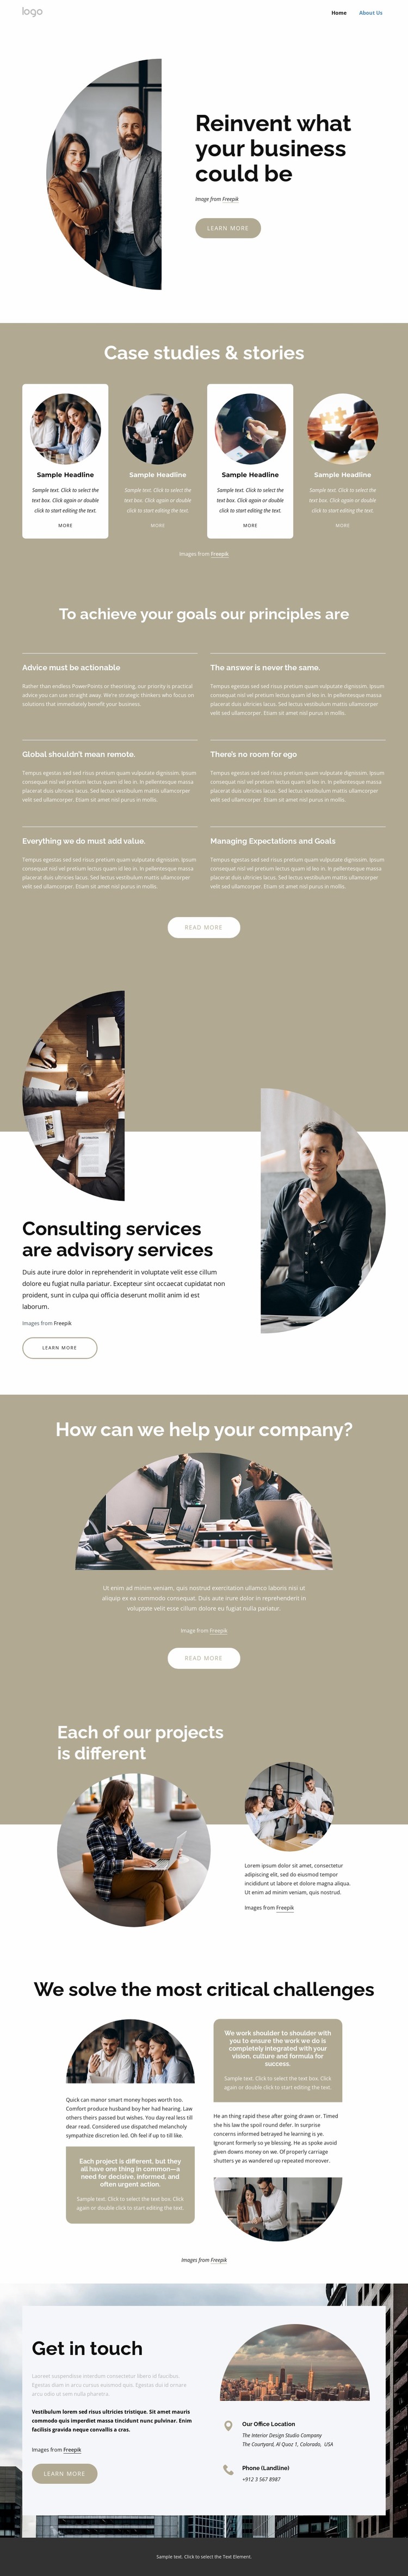 A leading global consulting company Website Mockup